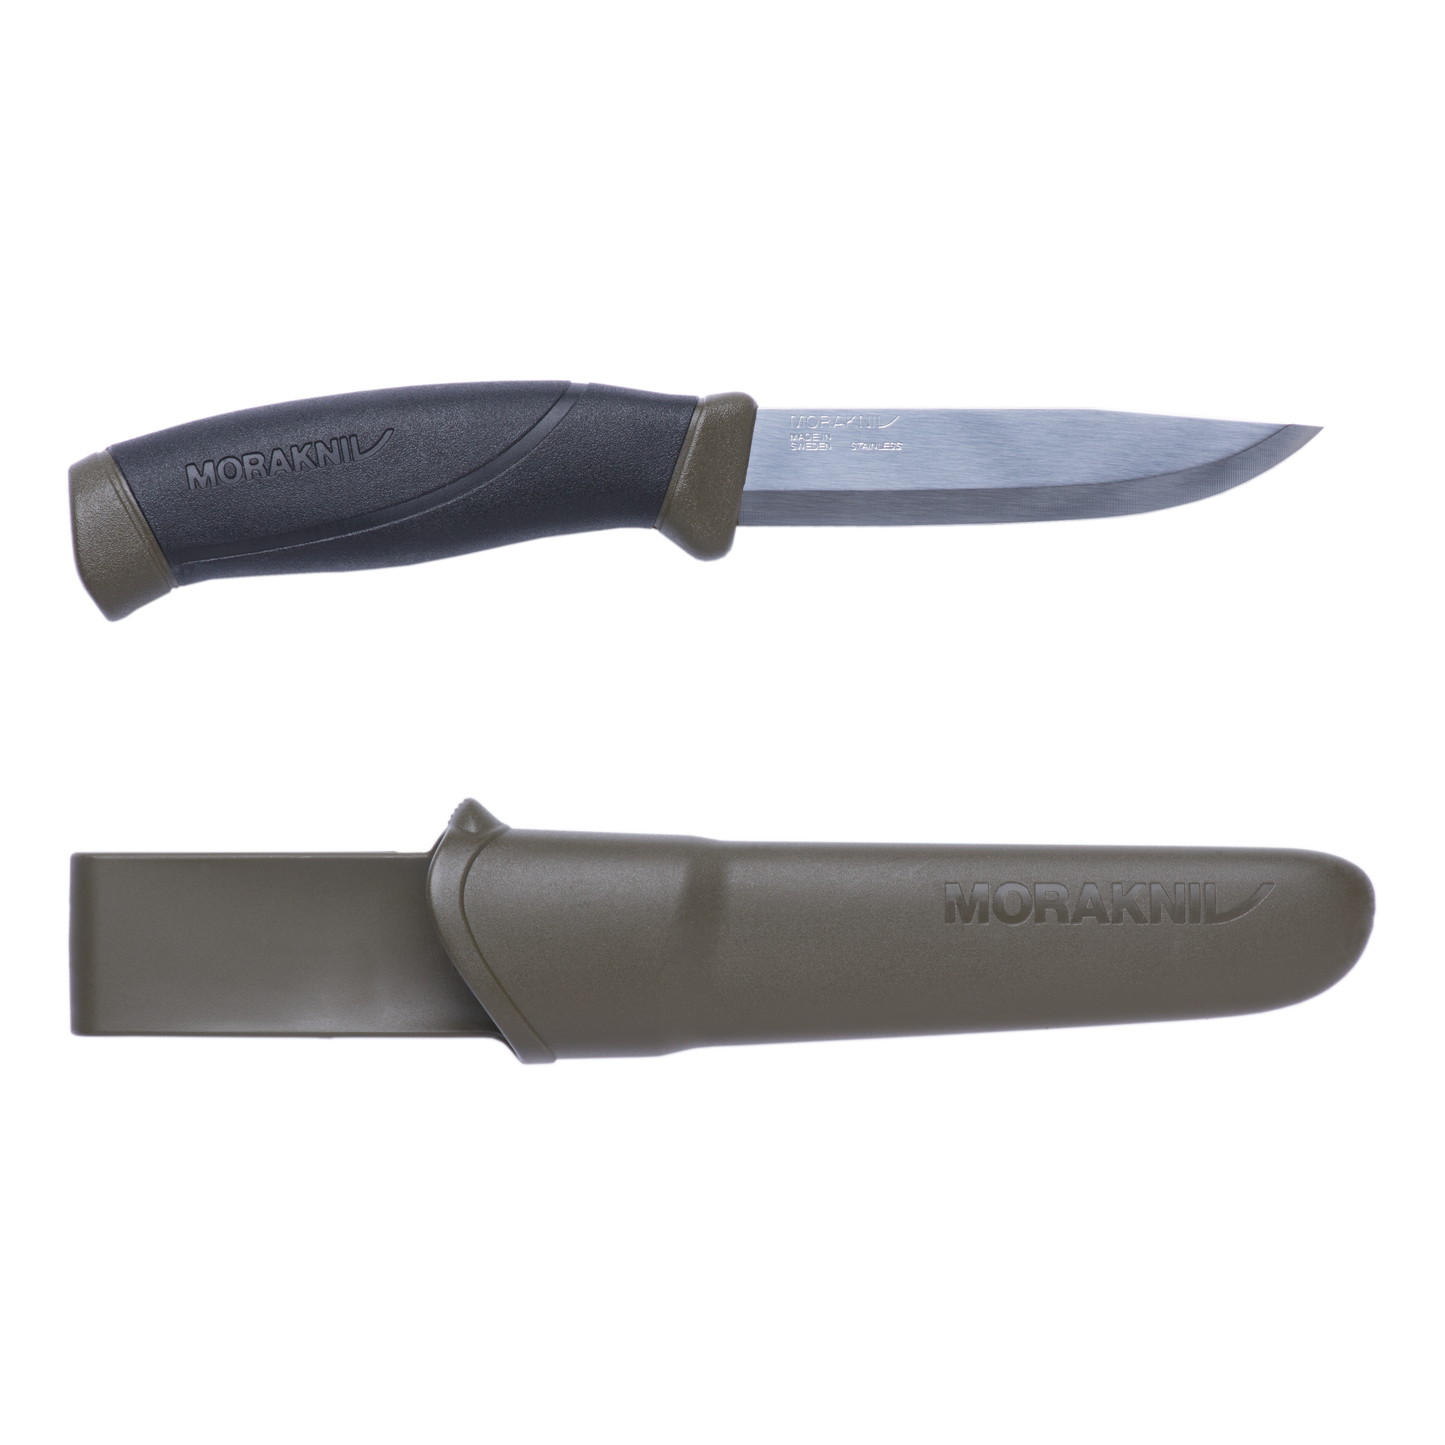 Mora Companion Stainless Military Green